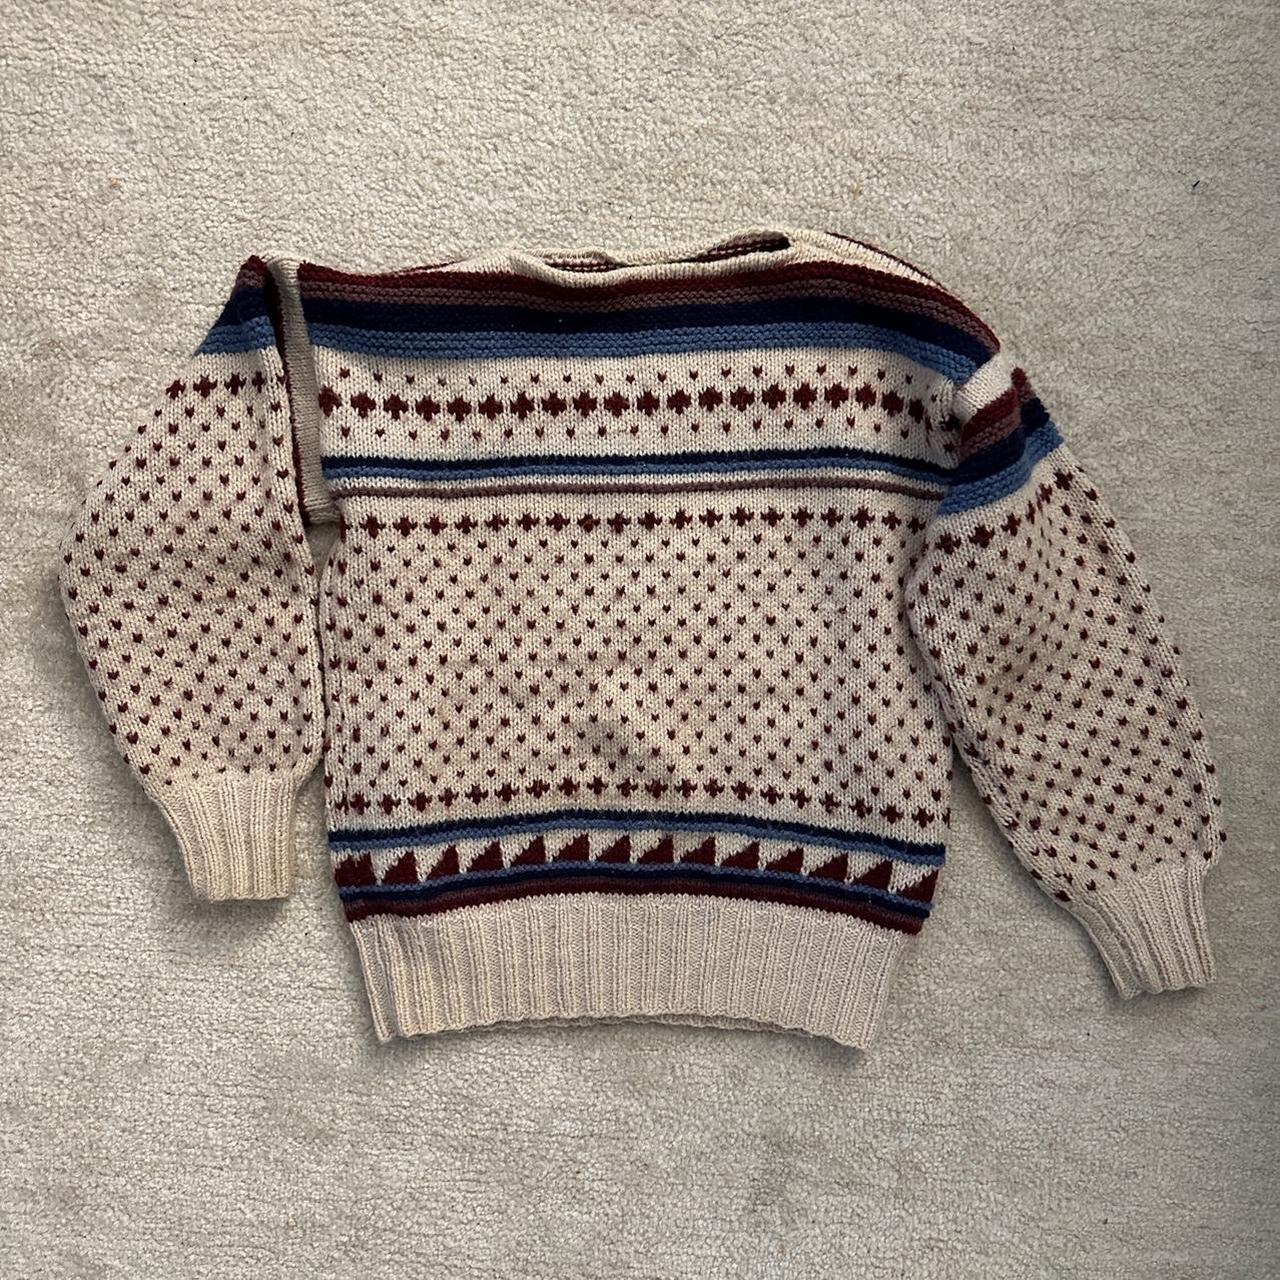 Multi Colored Knitted Sweater - Depop